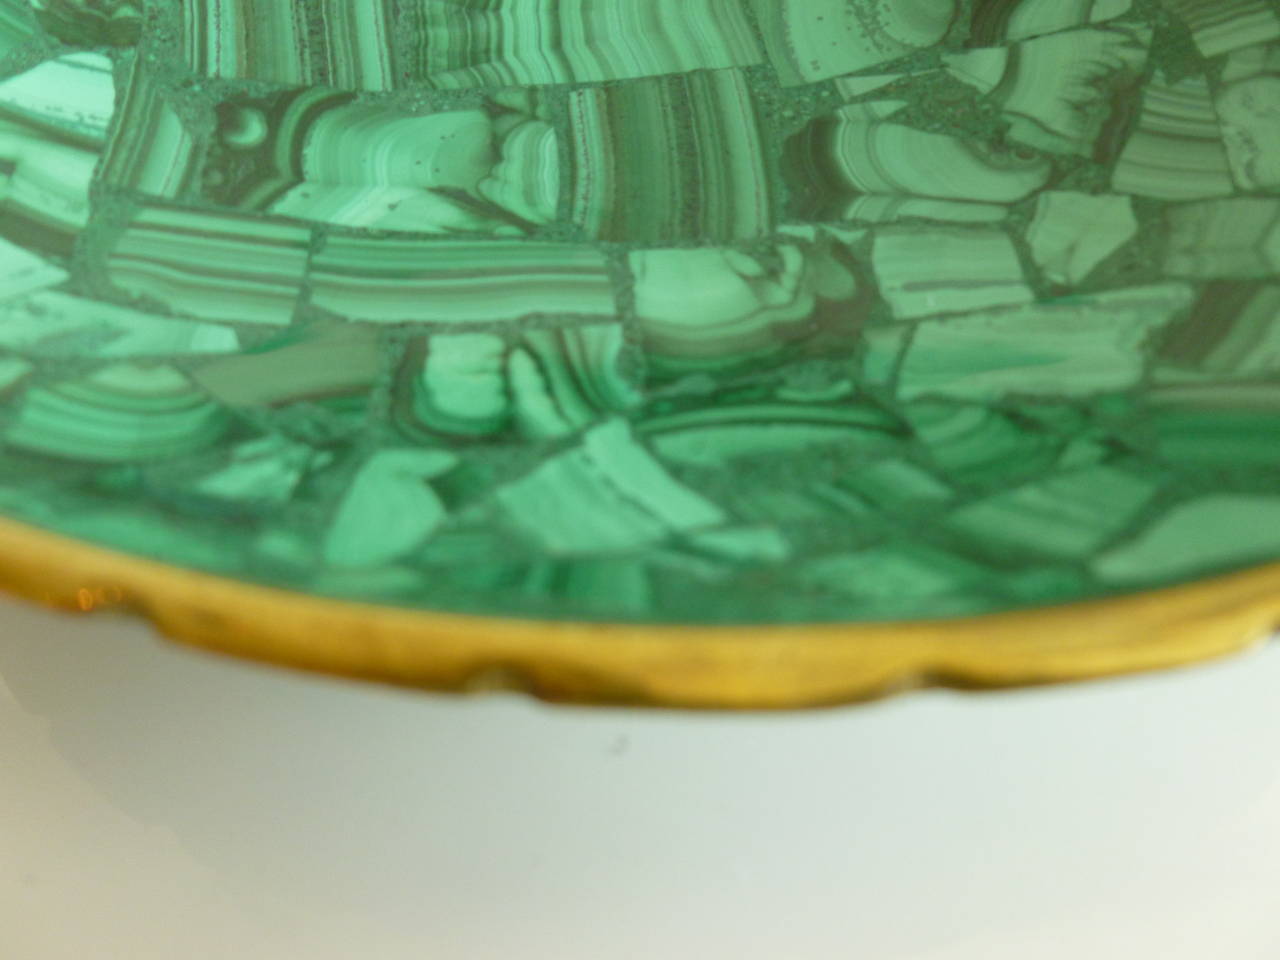 Mid-20th Century Malachite and Brass Small Bowl or Dish